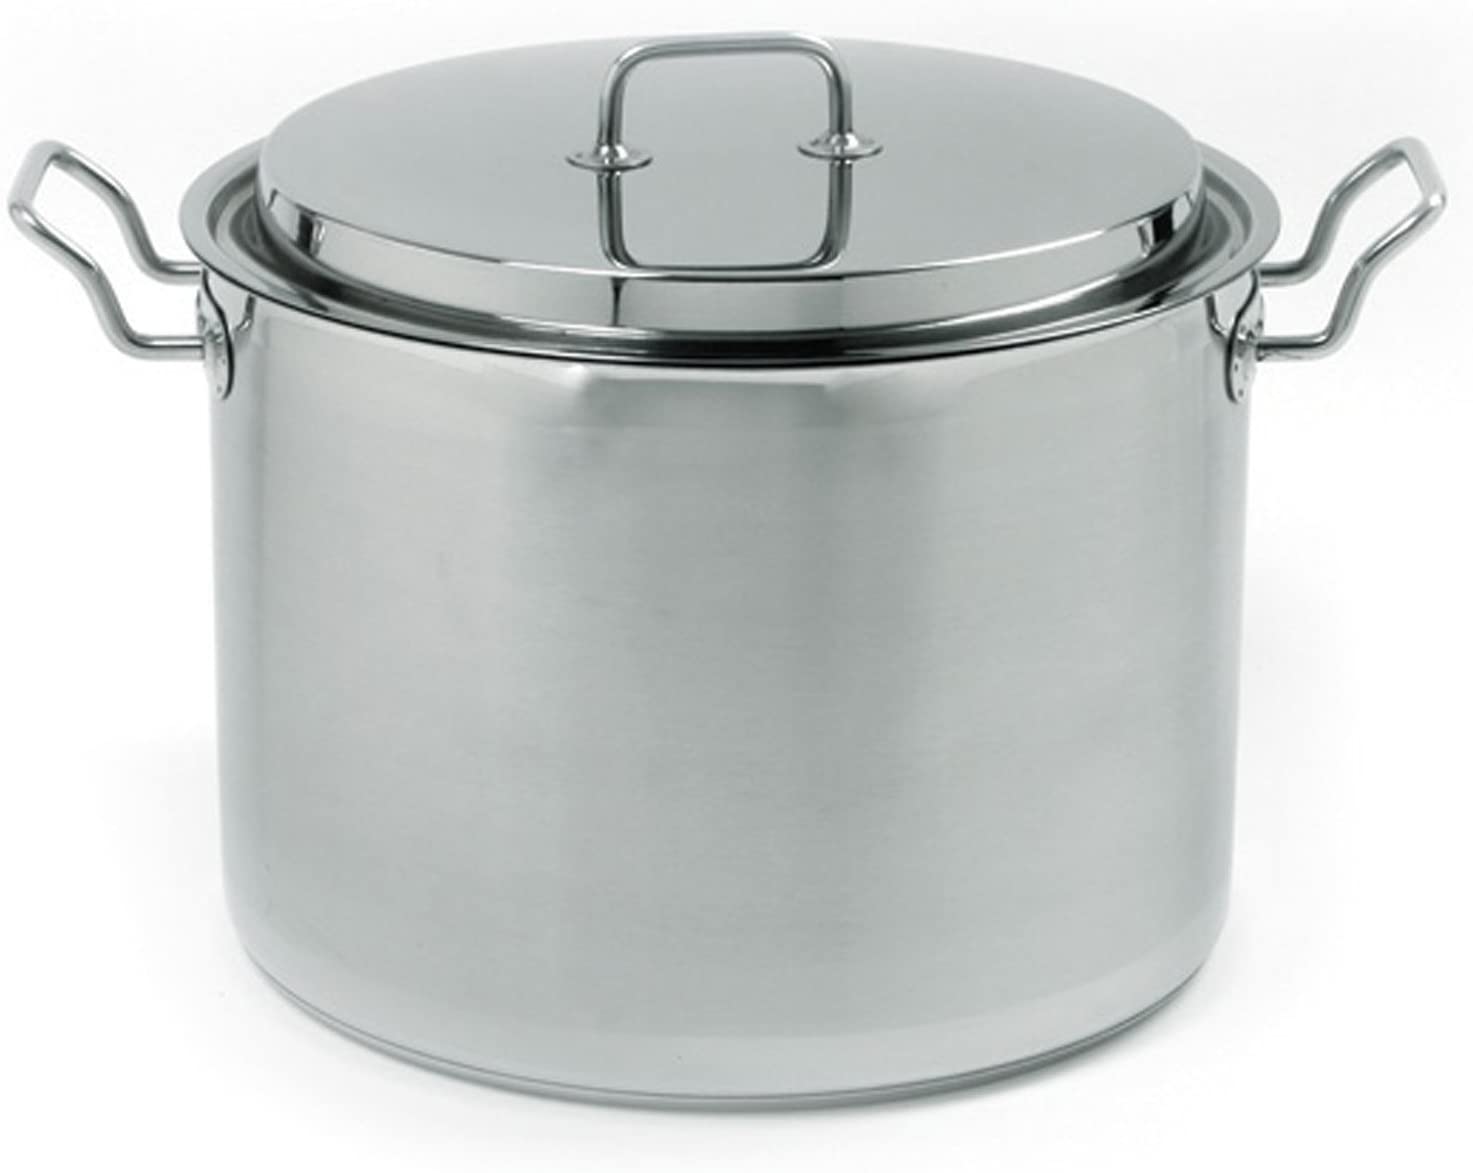 stainless steel pot with handles and lid.